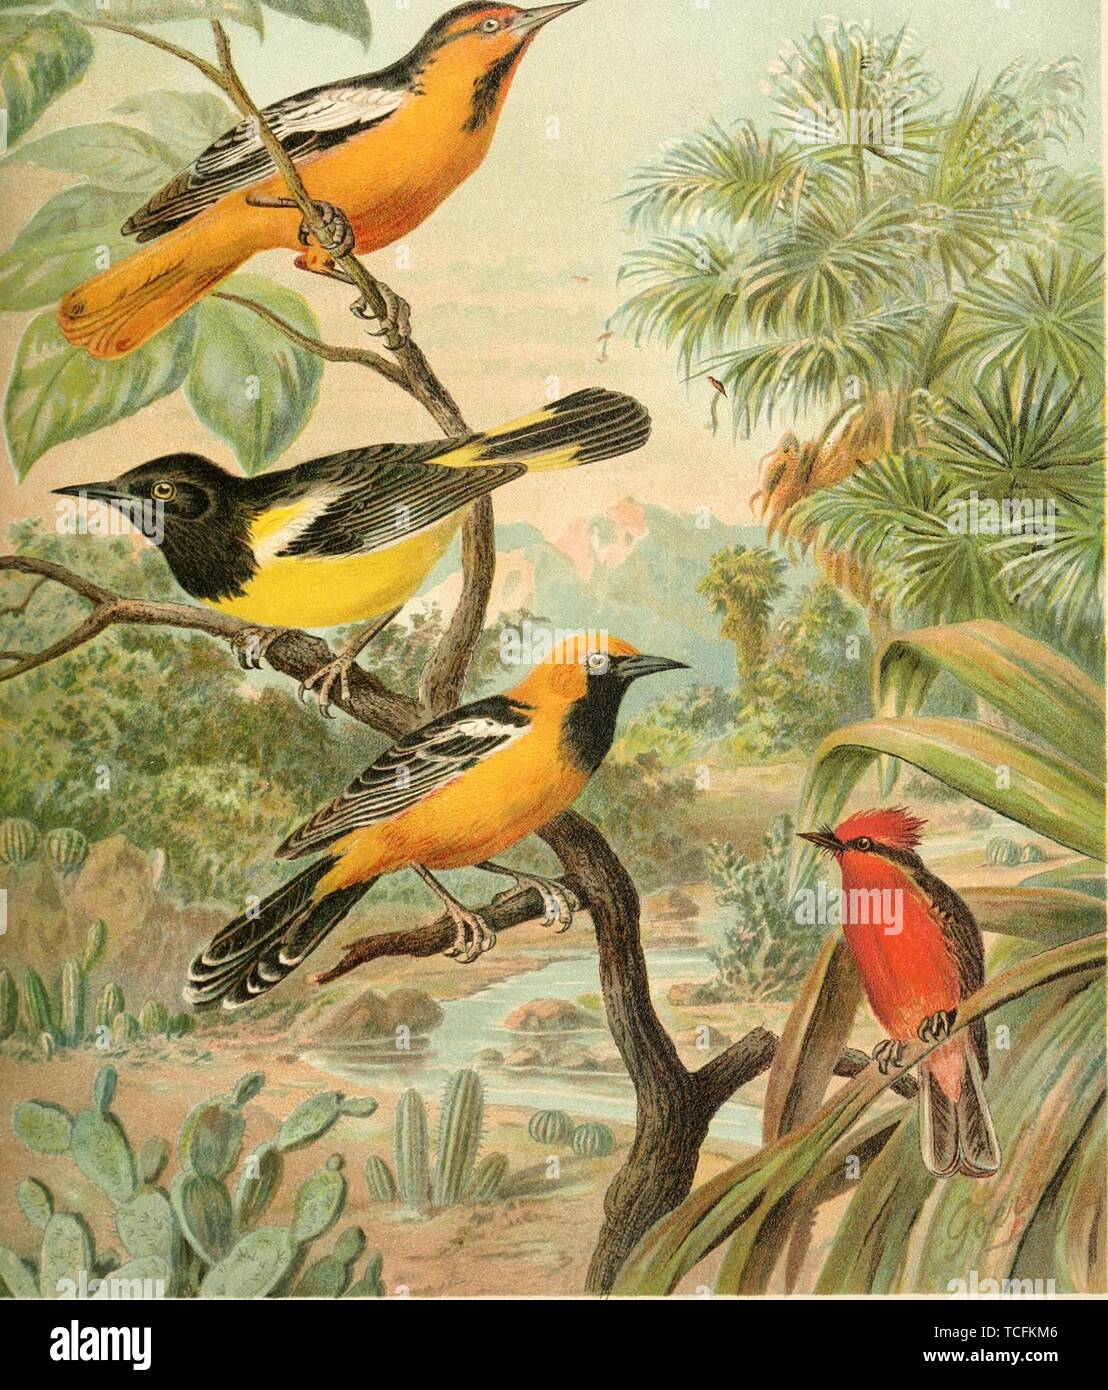 Engraved drawing of the Orioles, Bullock's Oriole (Icterus bullockii), Scott's Oriole (Icterus parisorum), Hooded Oriole (Icterus cucullatus), and Vermilion Flycatcher (Pyrocephalus obscurus), from the book 'Die Nord-Amerikanische Vogelwelt' by Henry Nehrling and Robert Ridgway, 1889. Courtesy Internet Archive. () Stock Photo